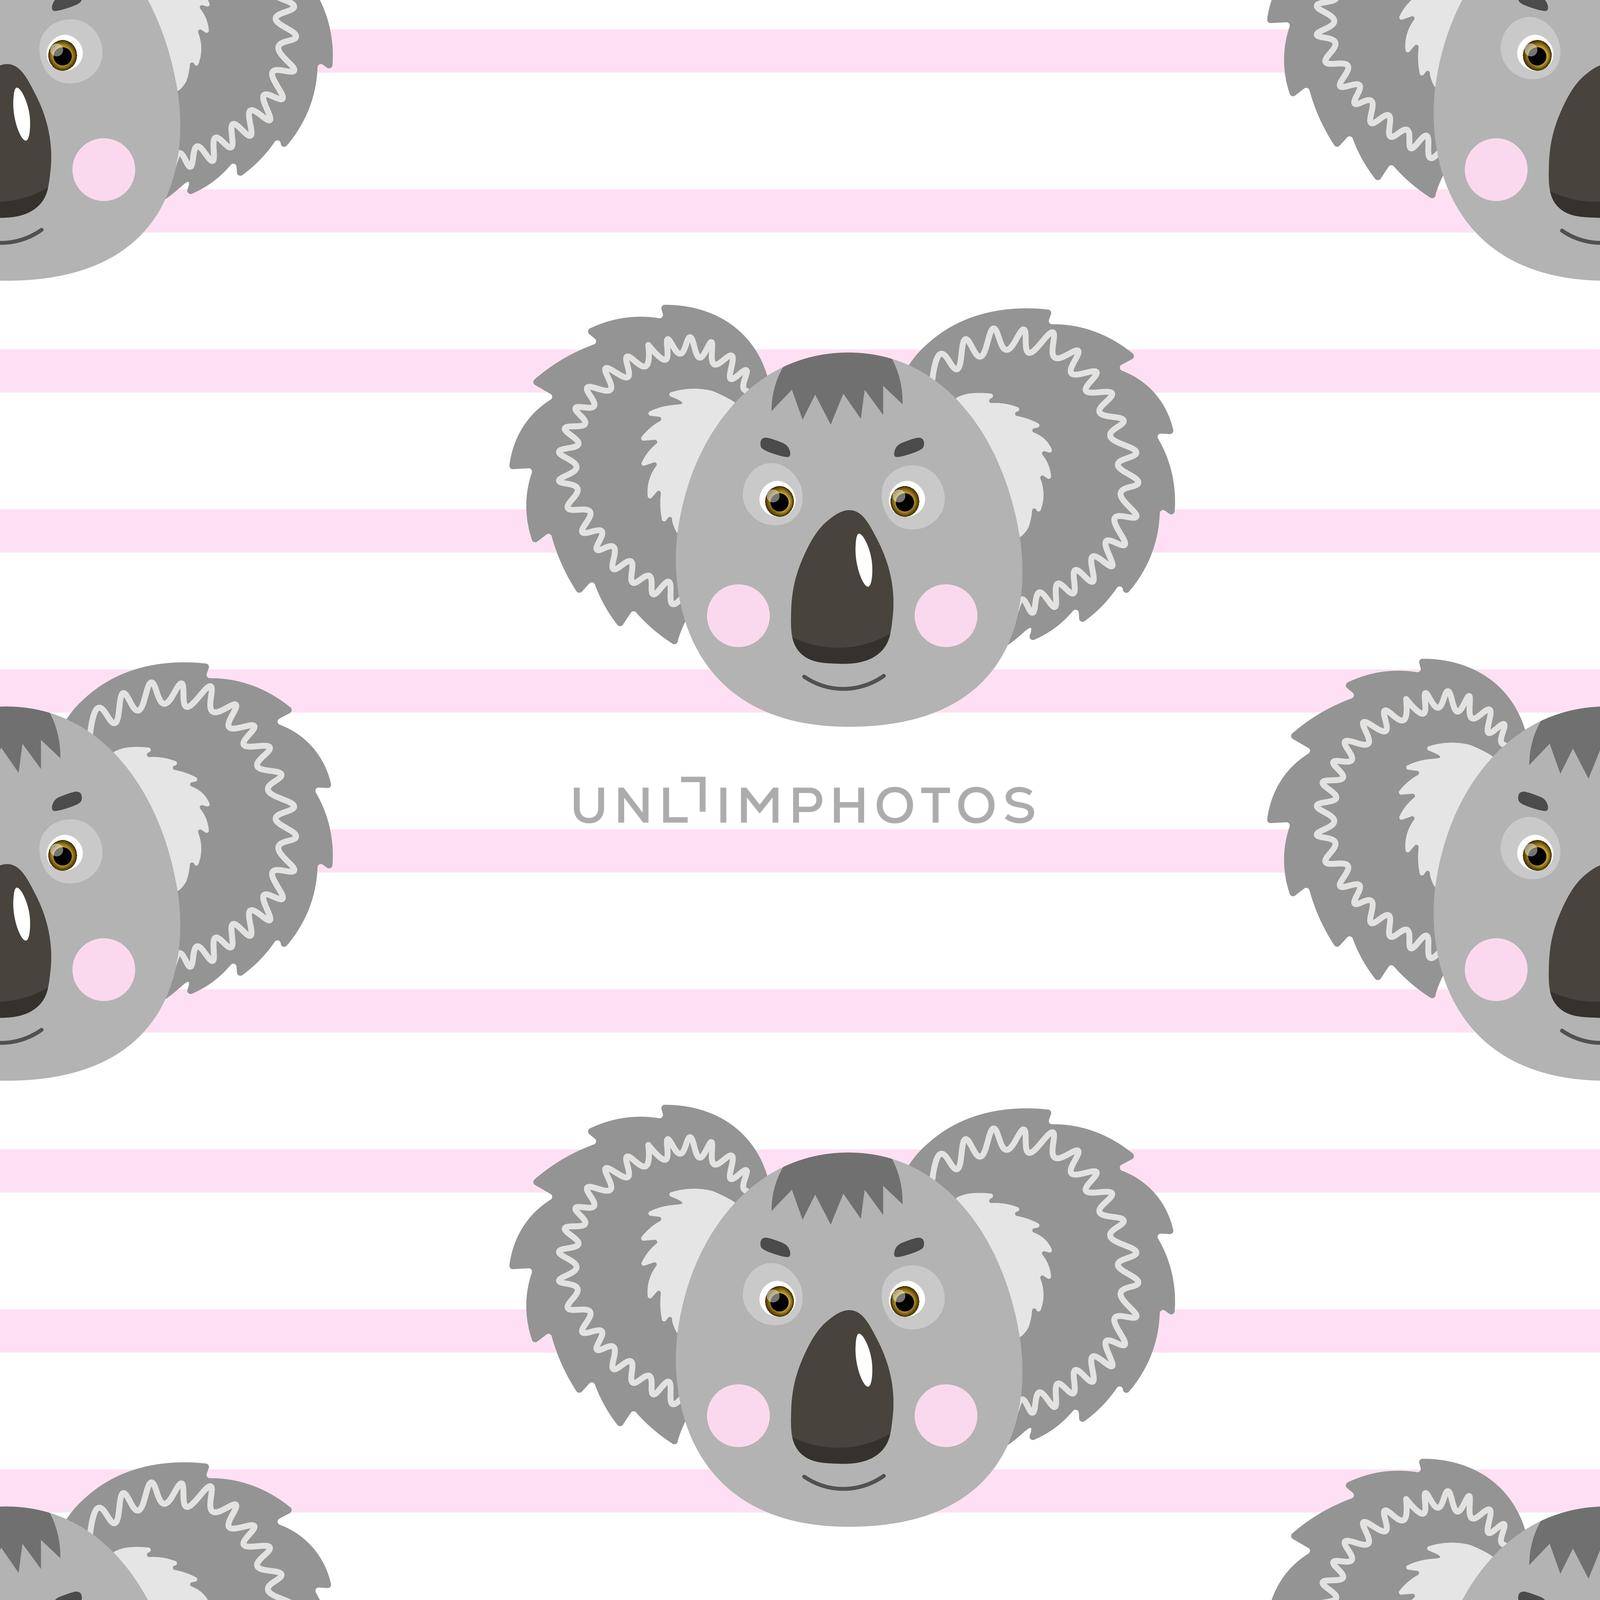 Vector flat animals colorful illustration for kids. Seamless pattern with cute koala face on white striped background. Adorable cartoon character. Design for card, poster, fabric, textile.